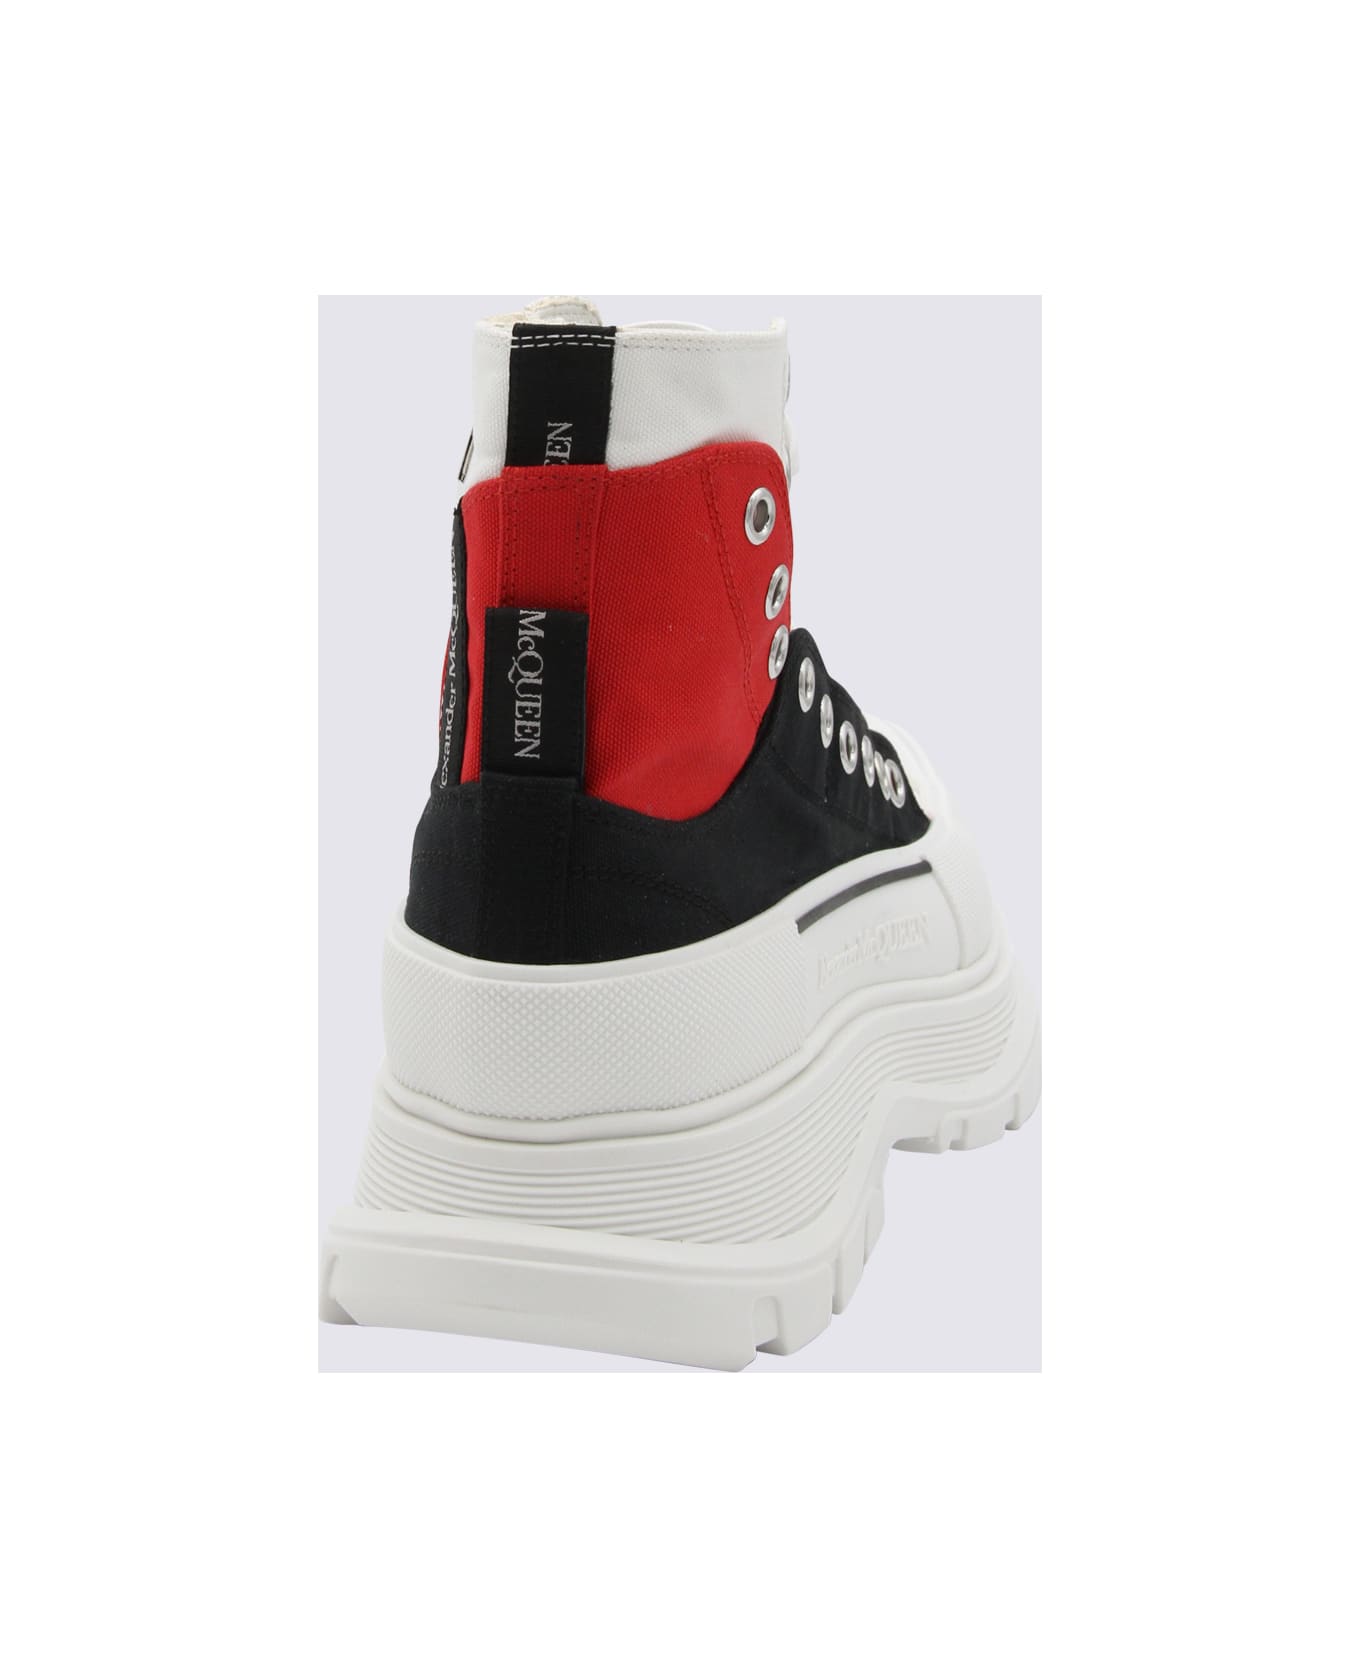 Alexander McQueen White Black And Red Canvas Tread Slick Lace Up Fastening Boots - BLK/L.R/WH/OF.W/B./S